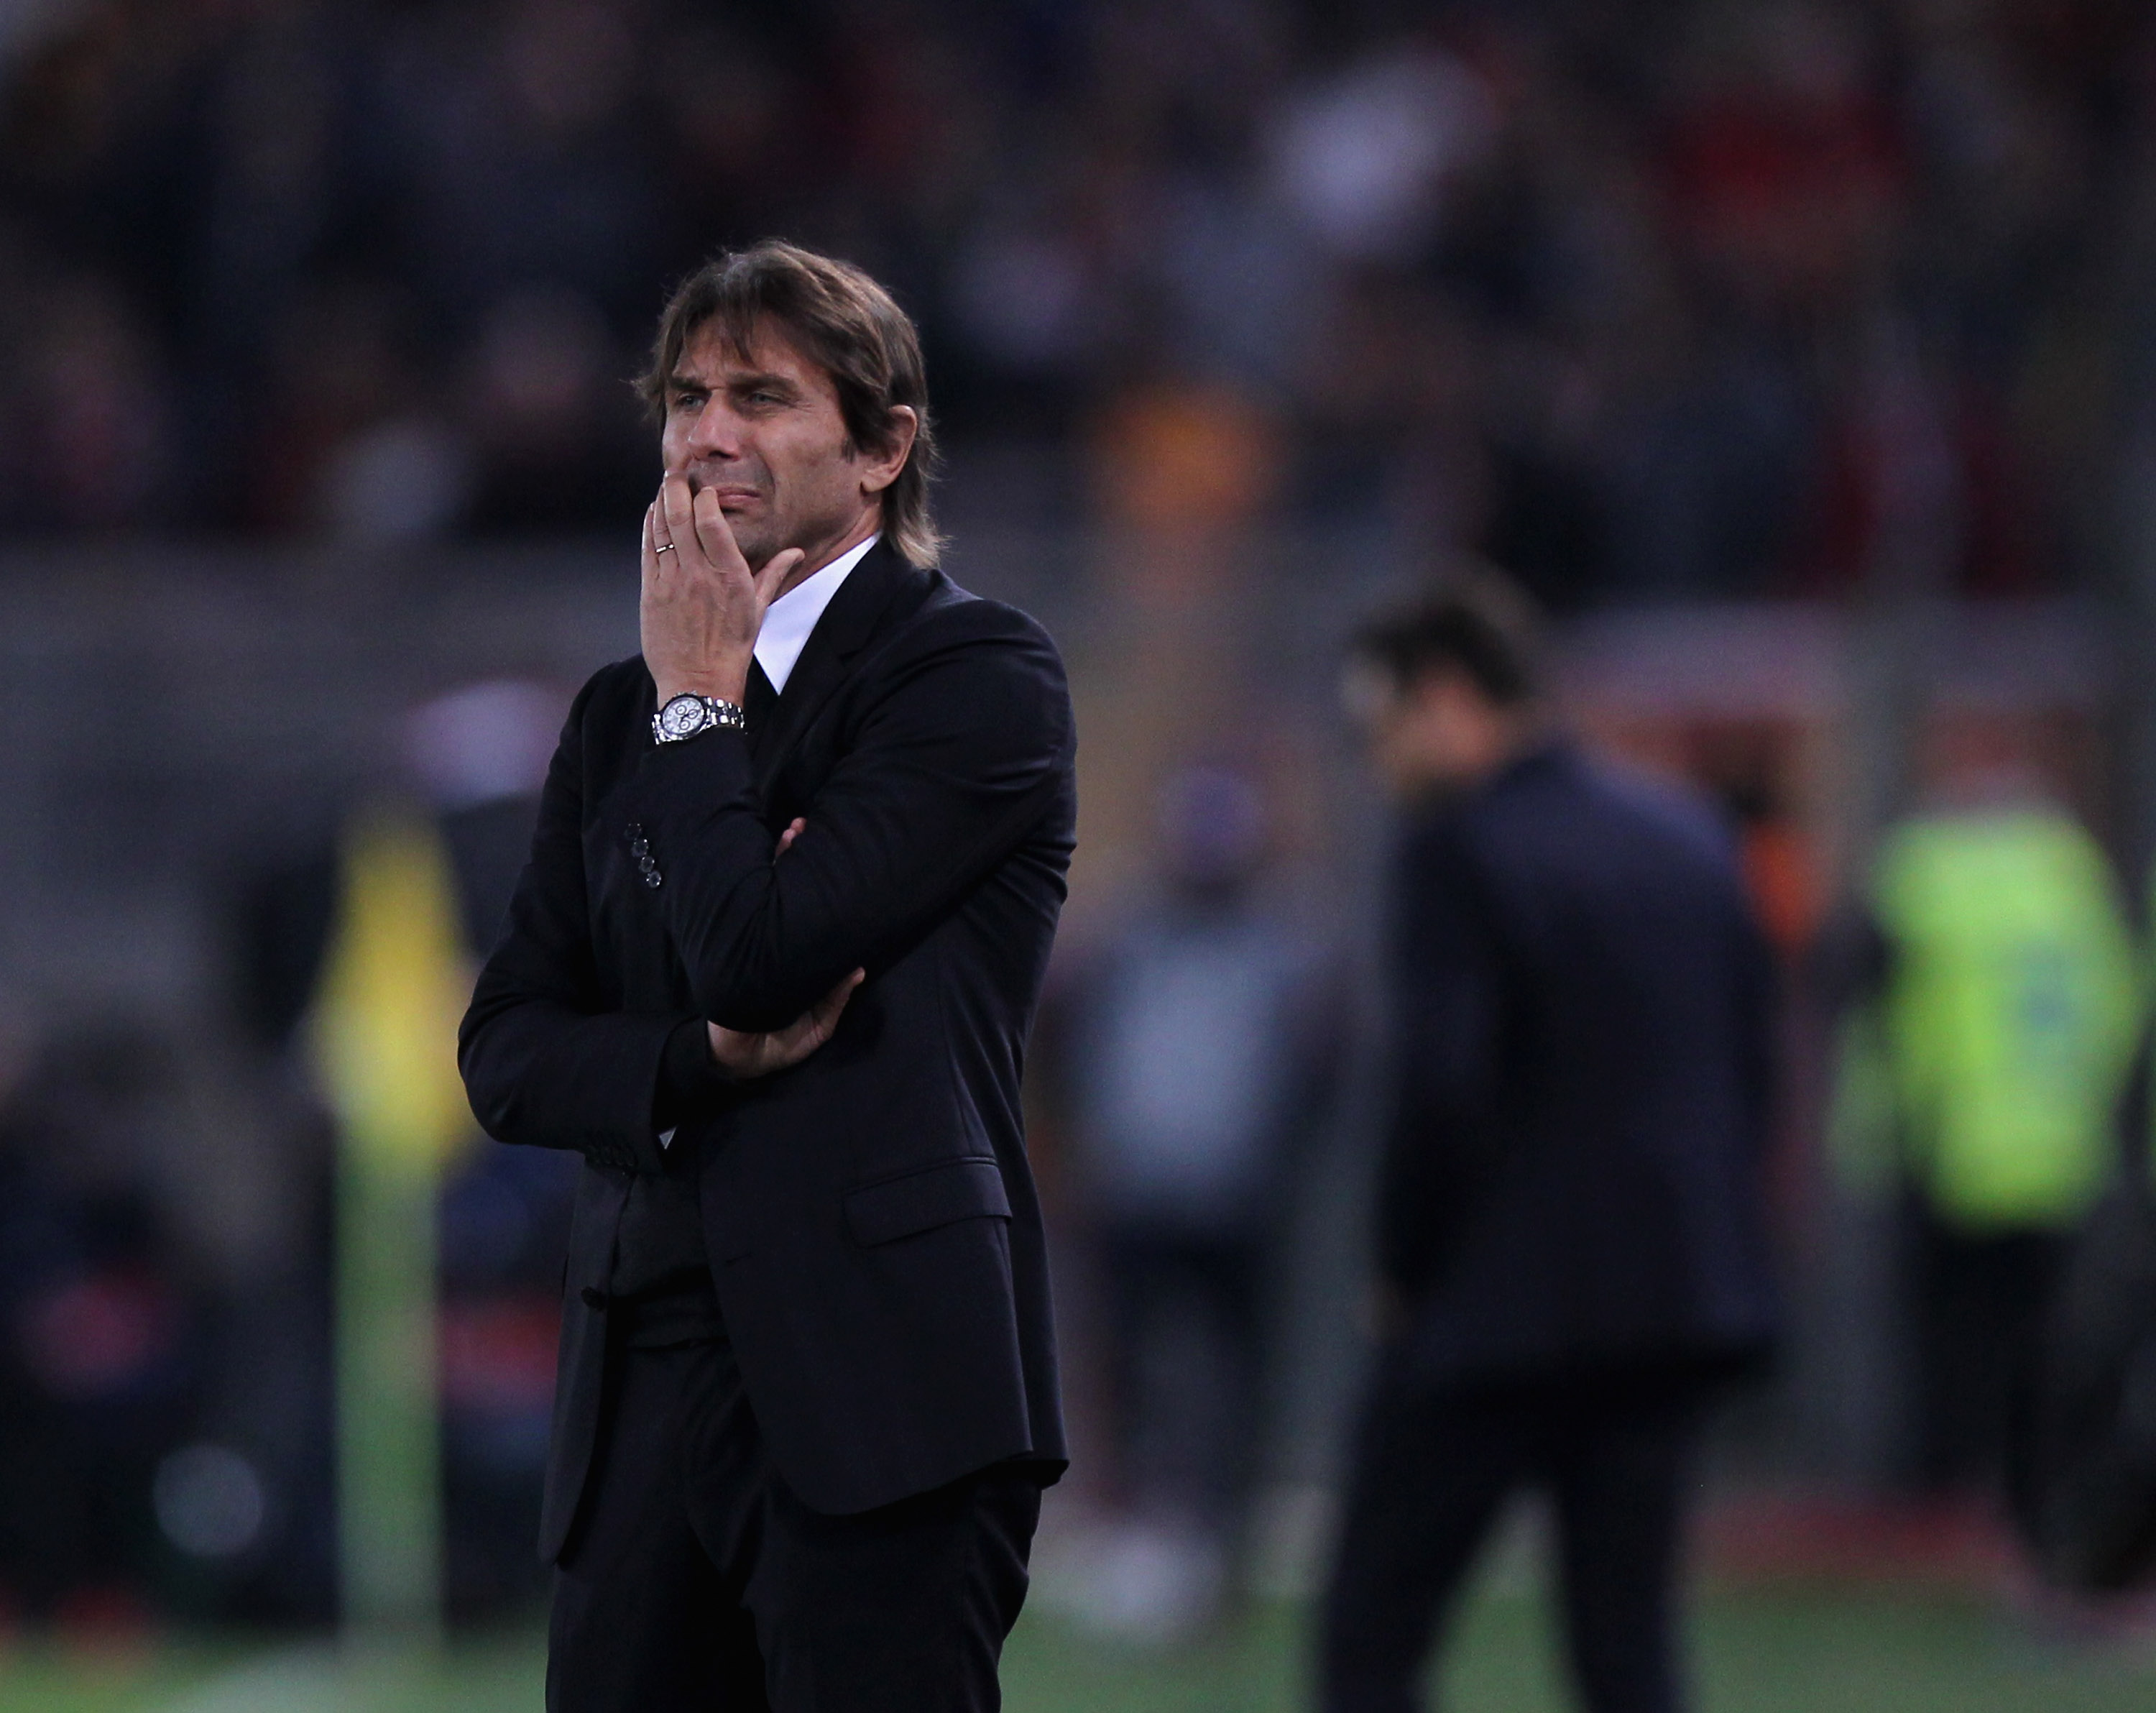 ROME, ITALY - OCTOBER 31:  Chelsea FC head coach Antonio Conte reacts during the UEFA Champions League group C match between AS Roma and Chelsea FC at Stadio Olimpico on October 31, 2017 in Rome, Italy.  (Photo by Paolo Bruno/Getty Images )